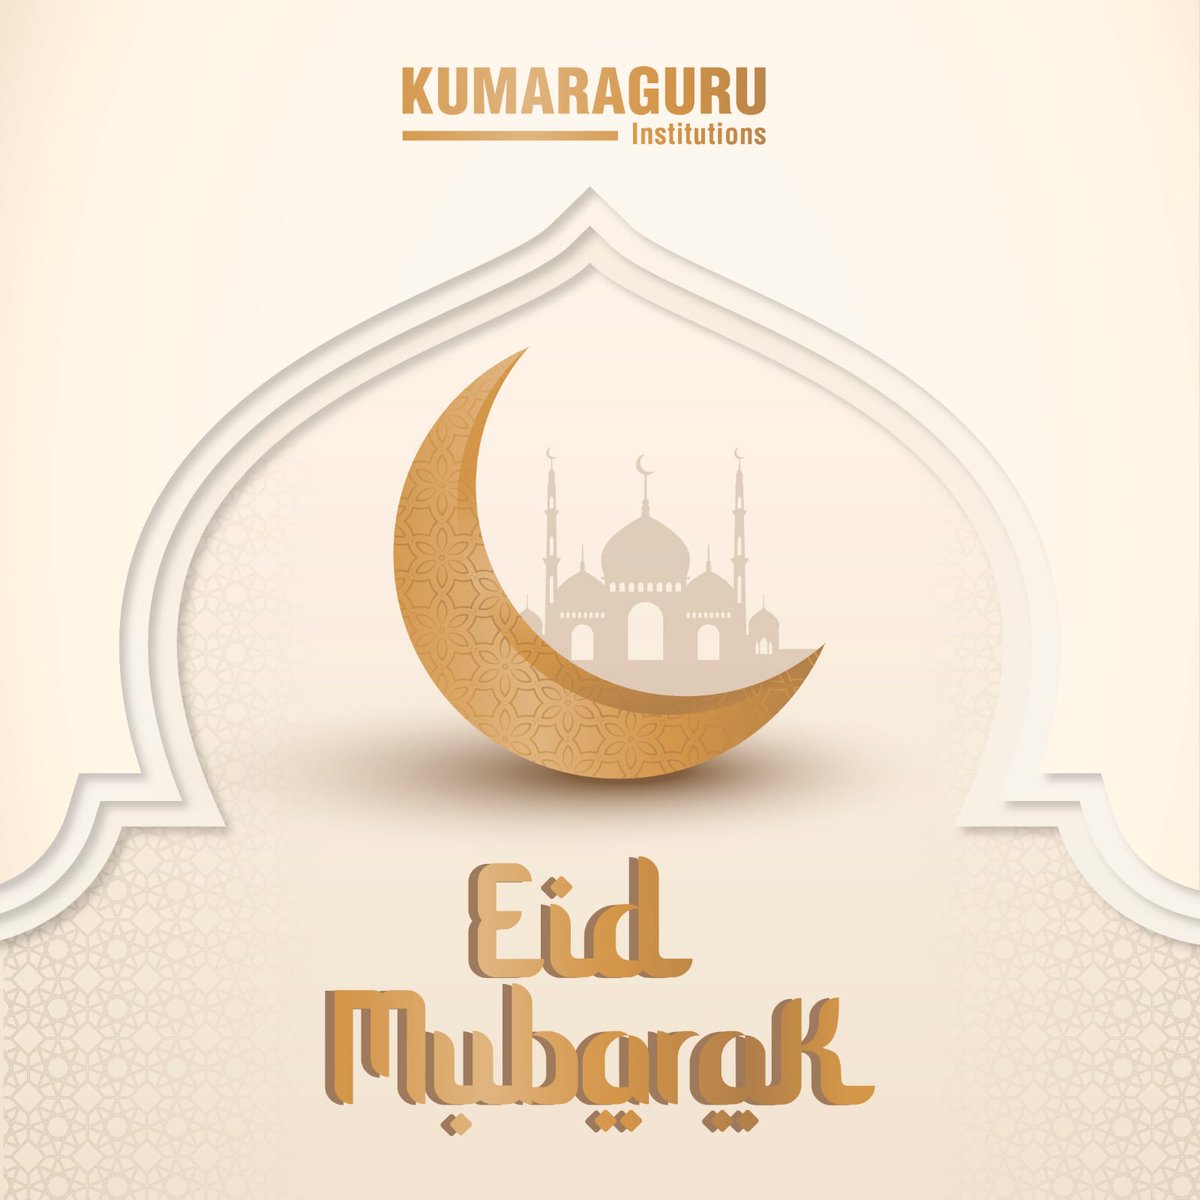 #KumaraguruInstitutions extends warm greetings and #EidMubarak to everyone on the Feast of #sacrifice, expressing the spirit of #peace, #harmony and #happiness.